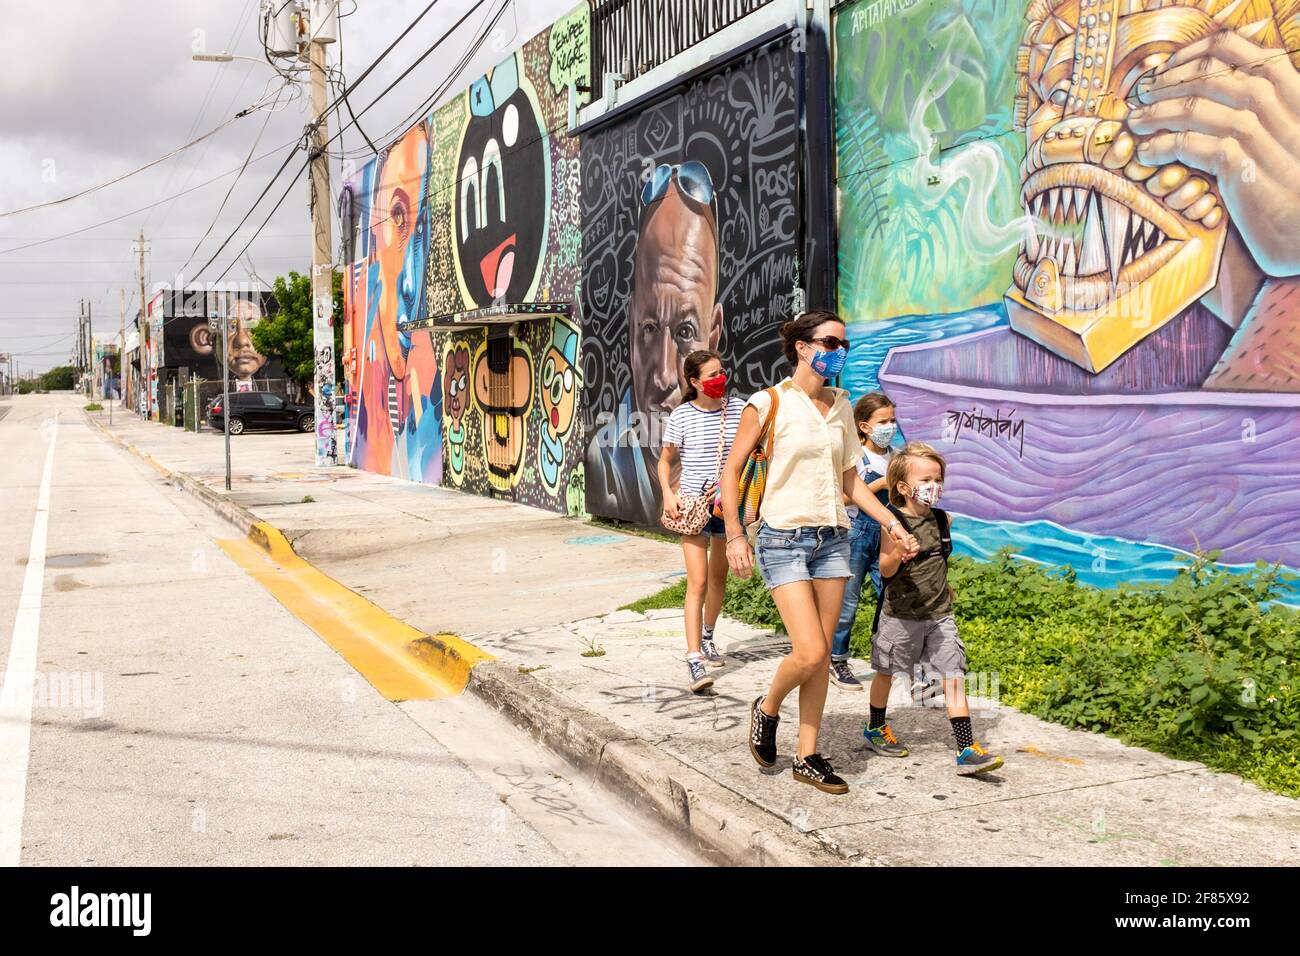 A young family walks by walls covered in graffiti art in the Wynwood Art District, Miami, FLorida, USA Stock Photo